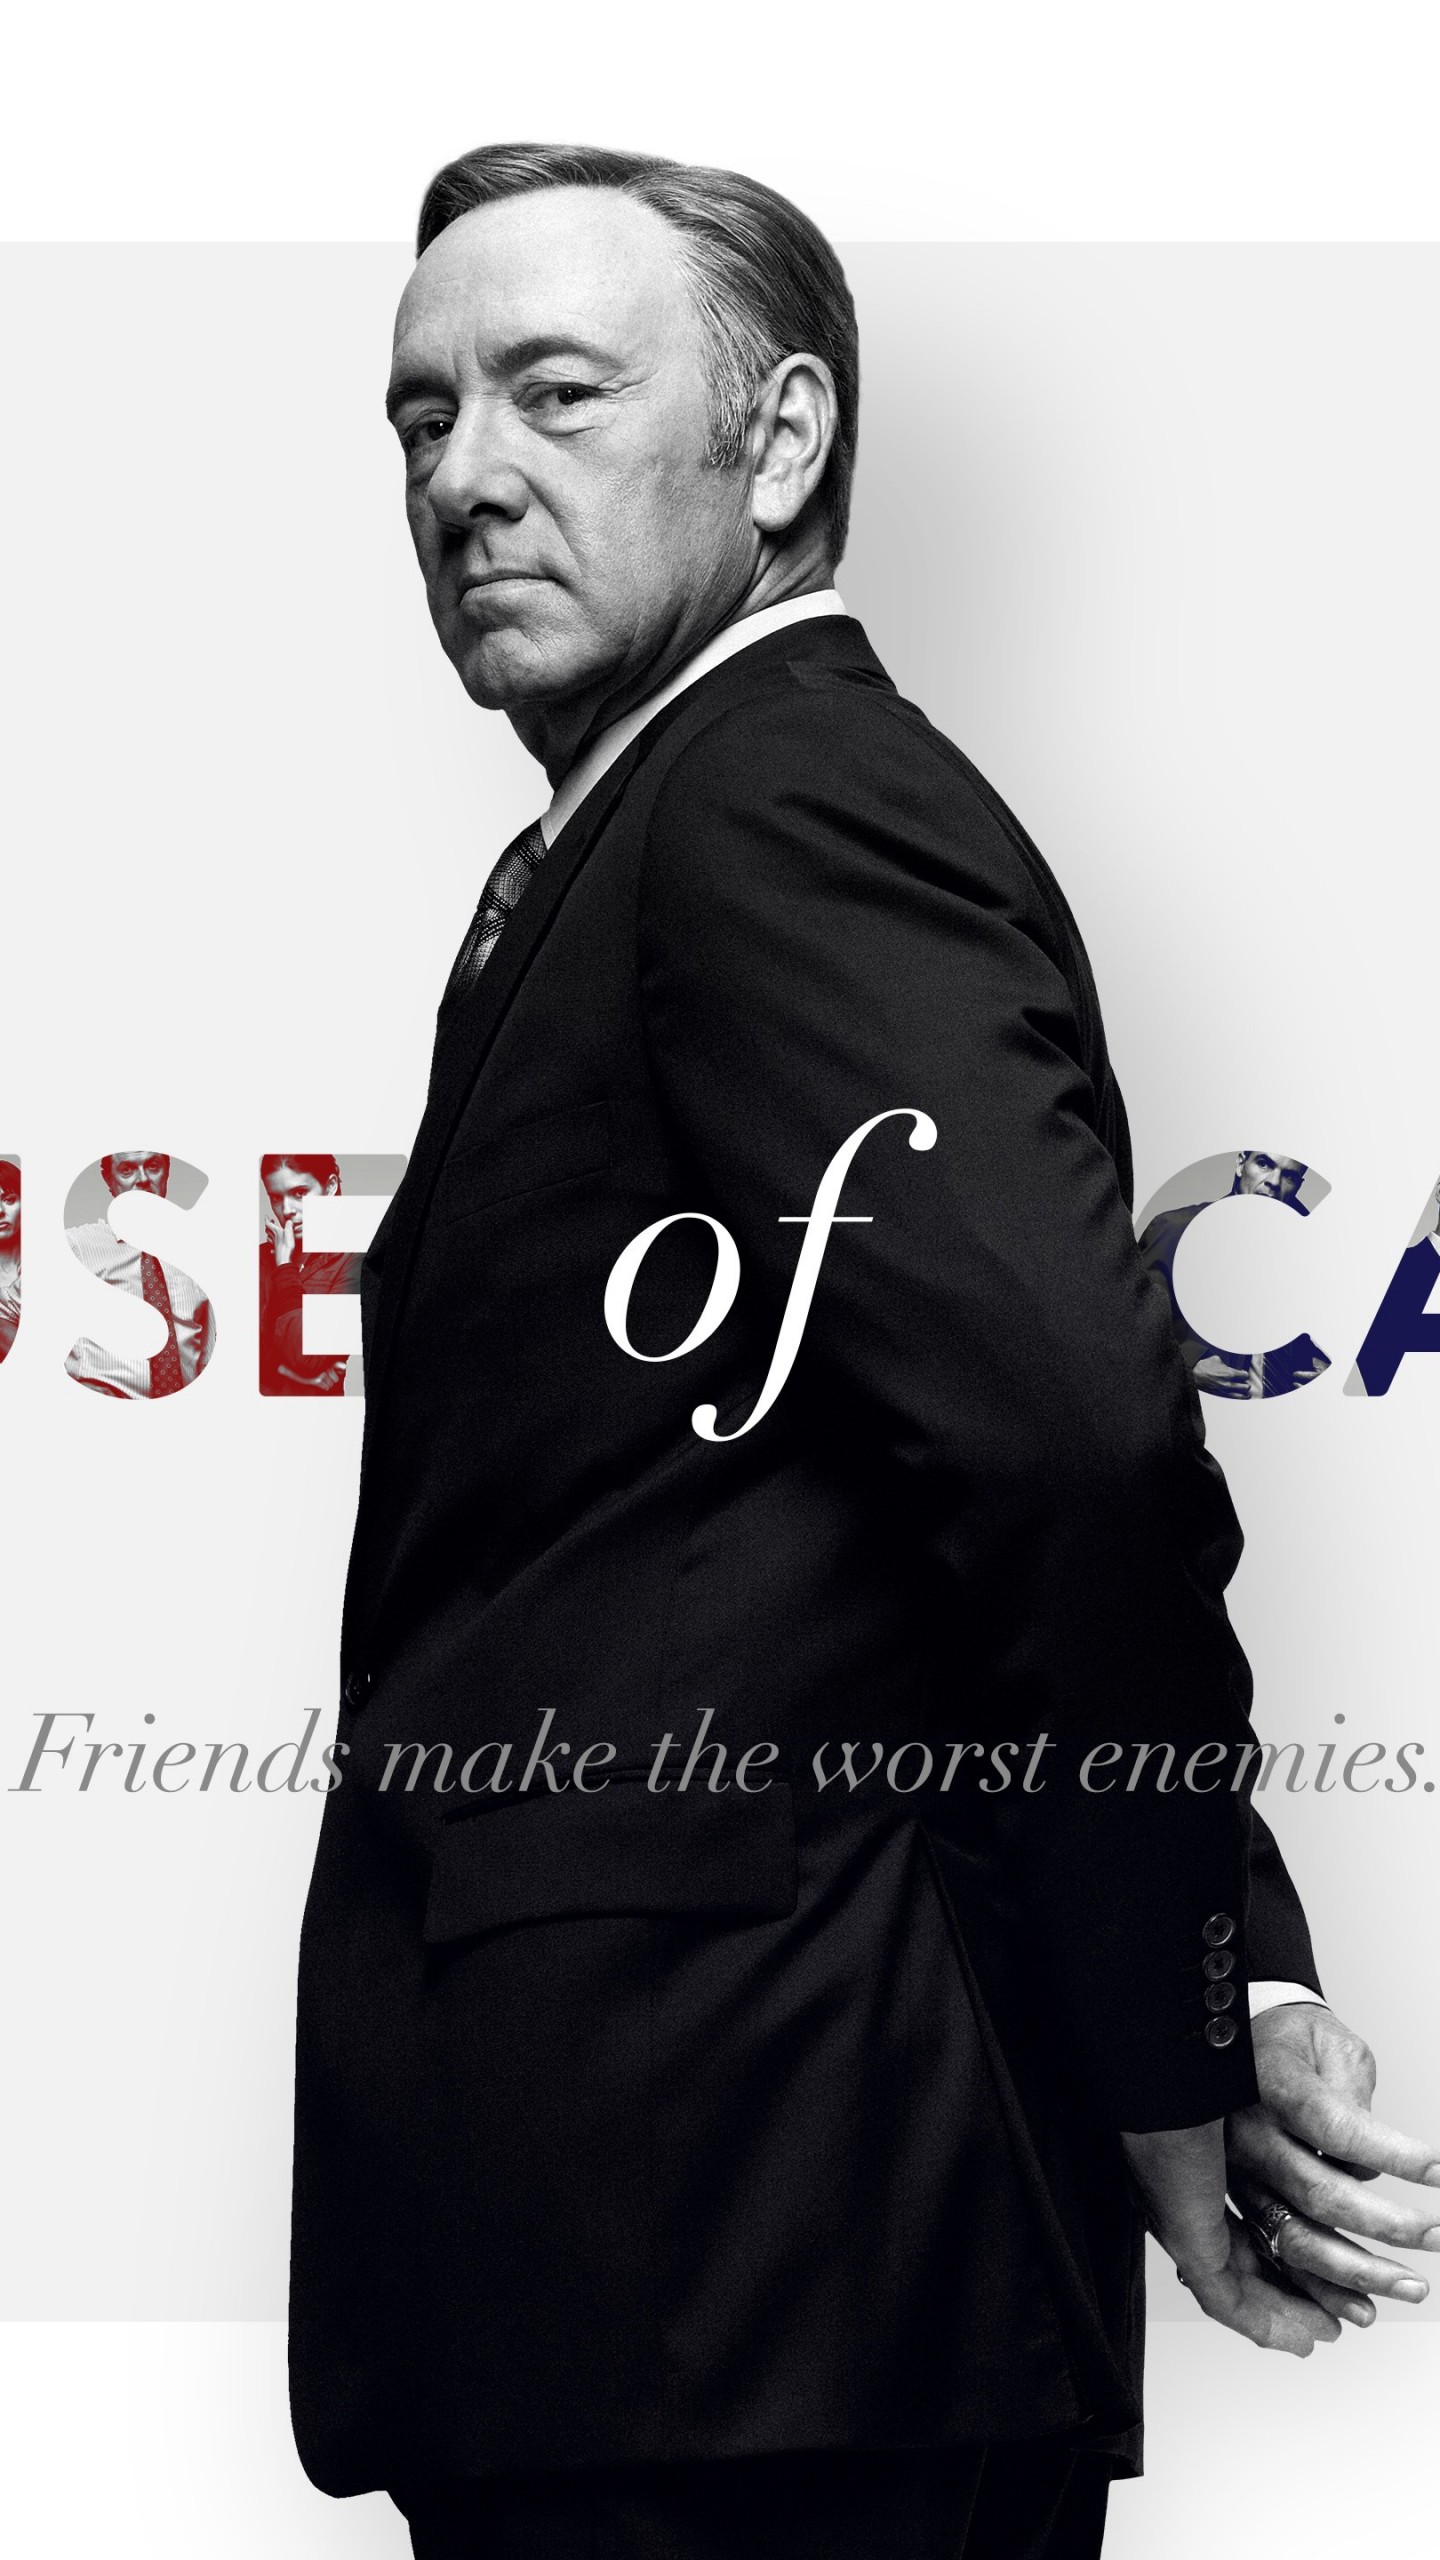 Frank Underwood - House of Cards Wallpaper for SAMSUNG Galaxy Note 4